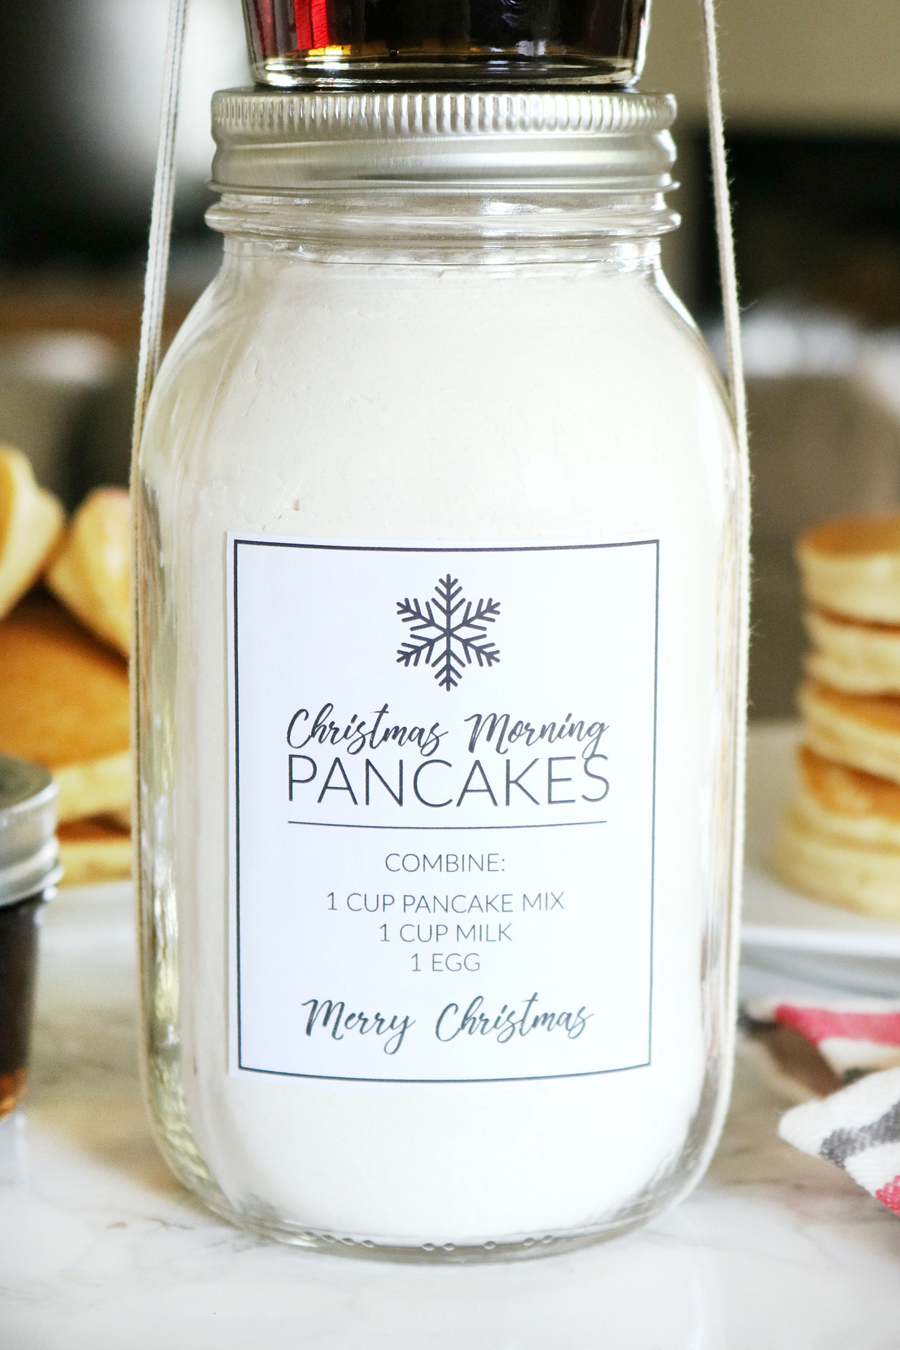 Christmas Morning Pancakes in a Jar Gift Idea